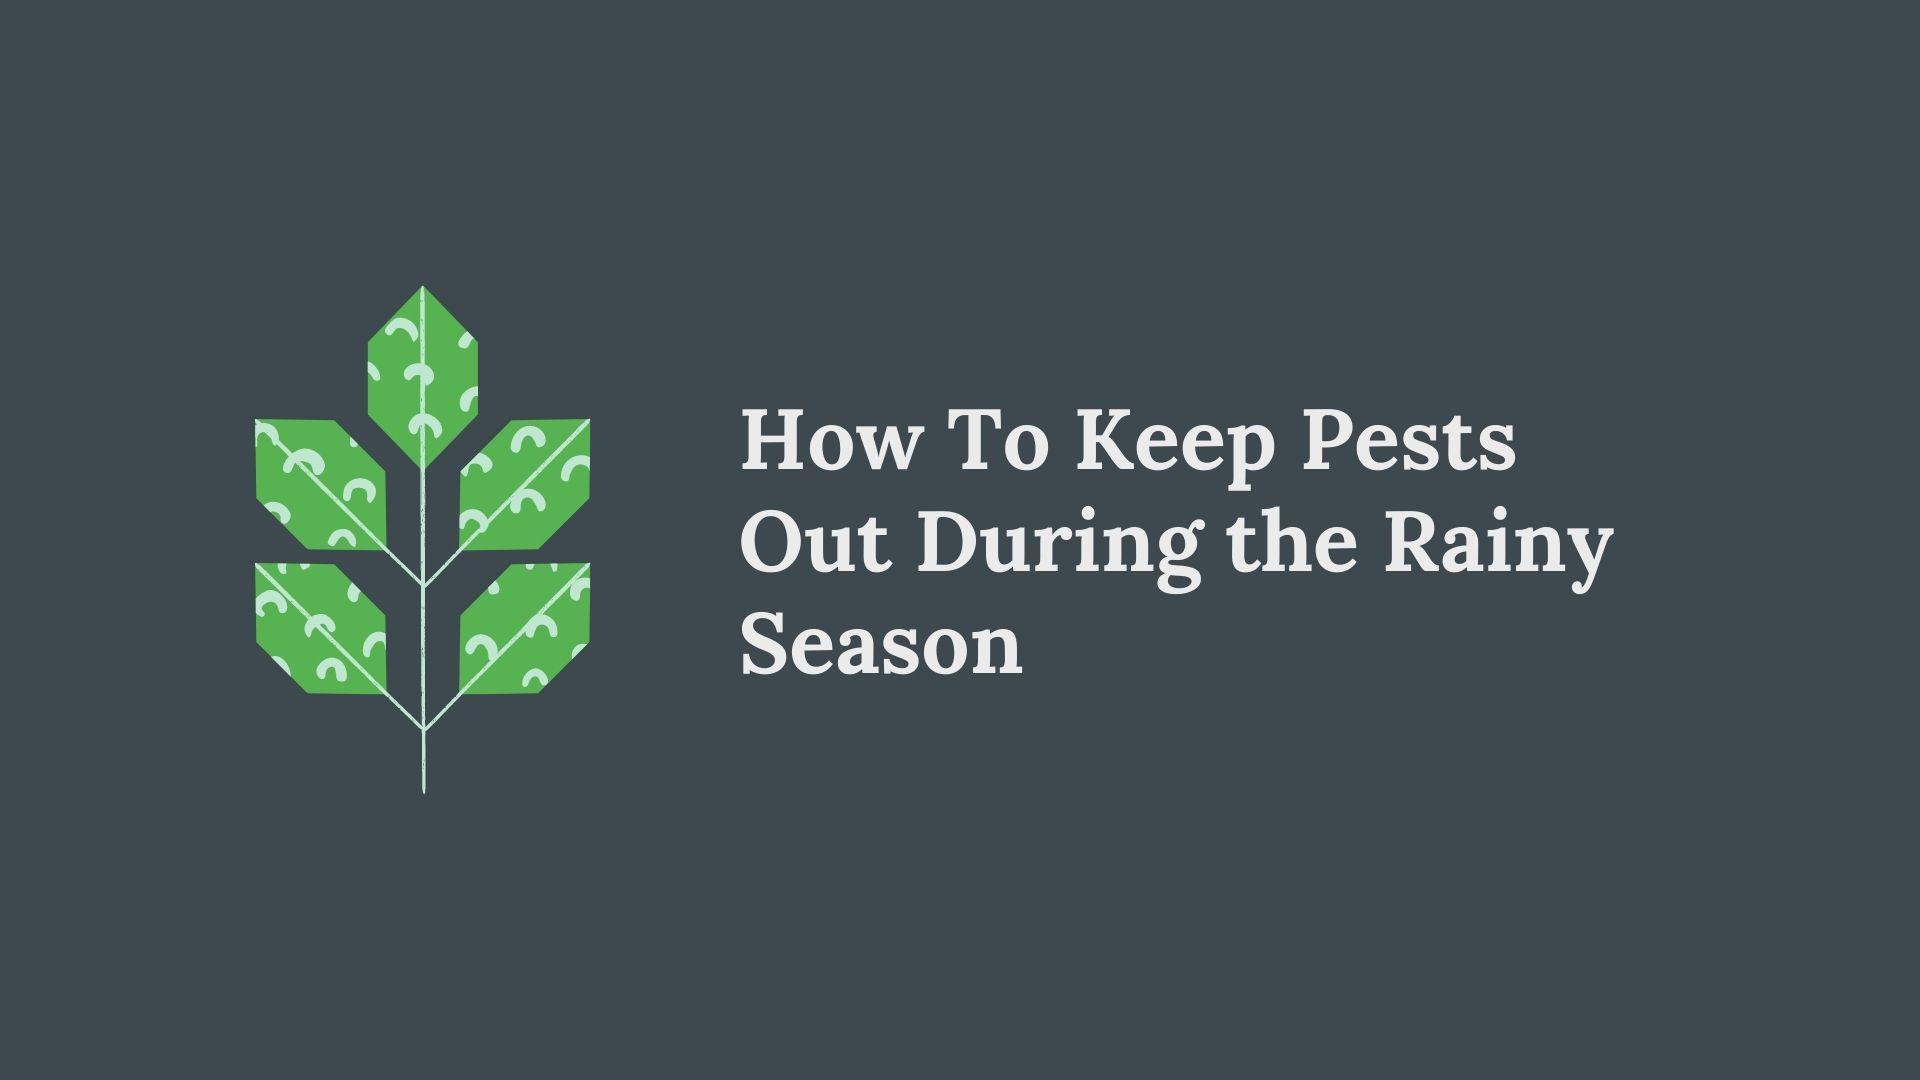 How To Keep Pests Out During the Rainy Season